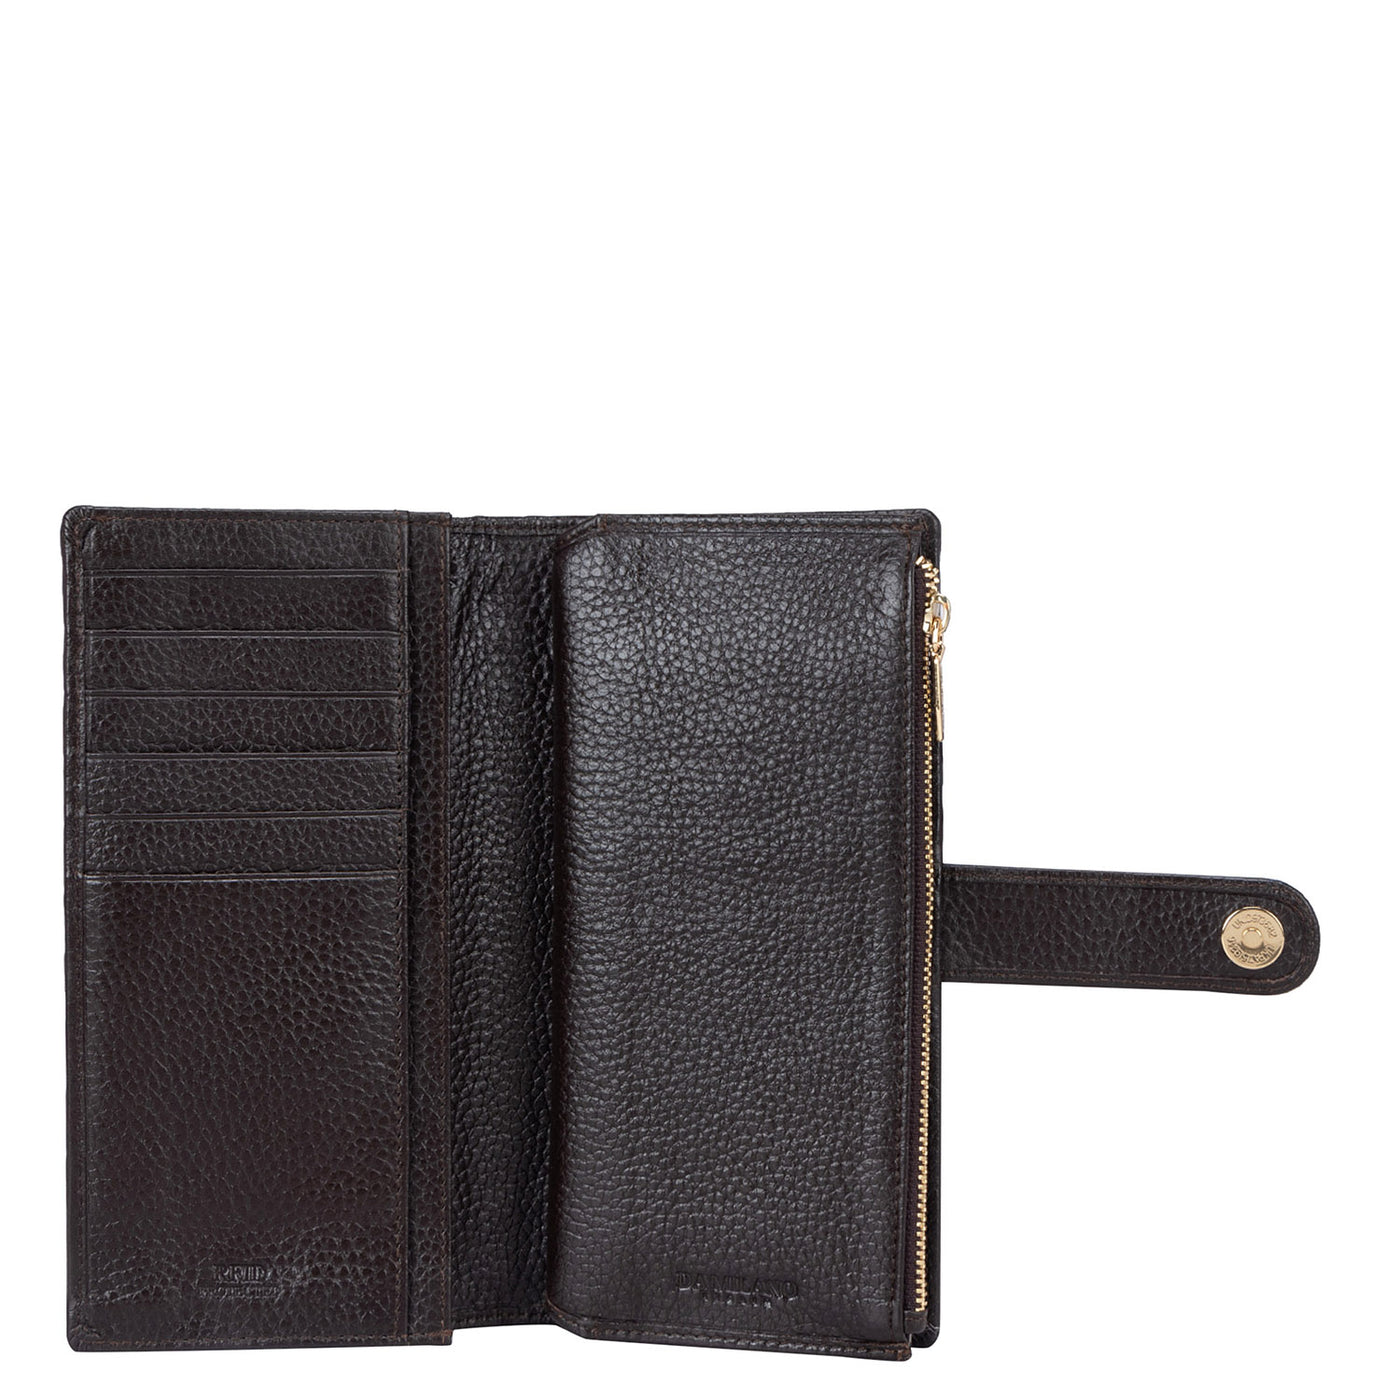 Mat Leather Ladies Wallet - Chocolate